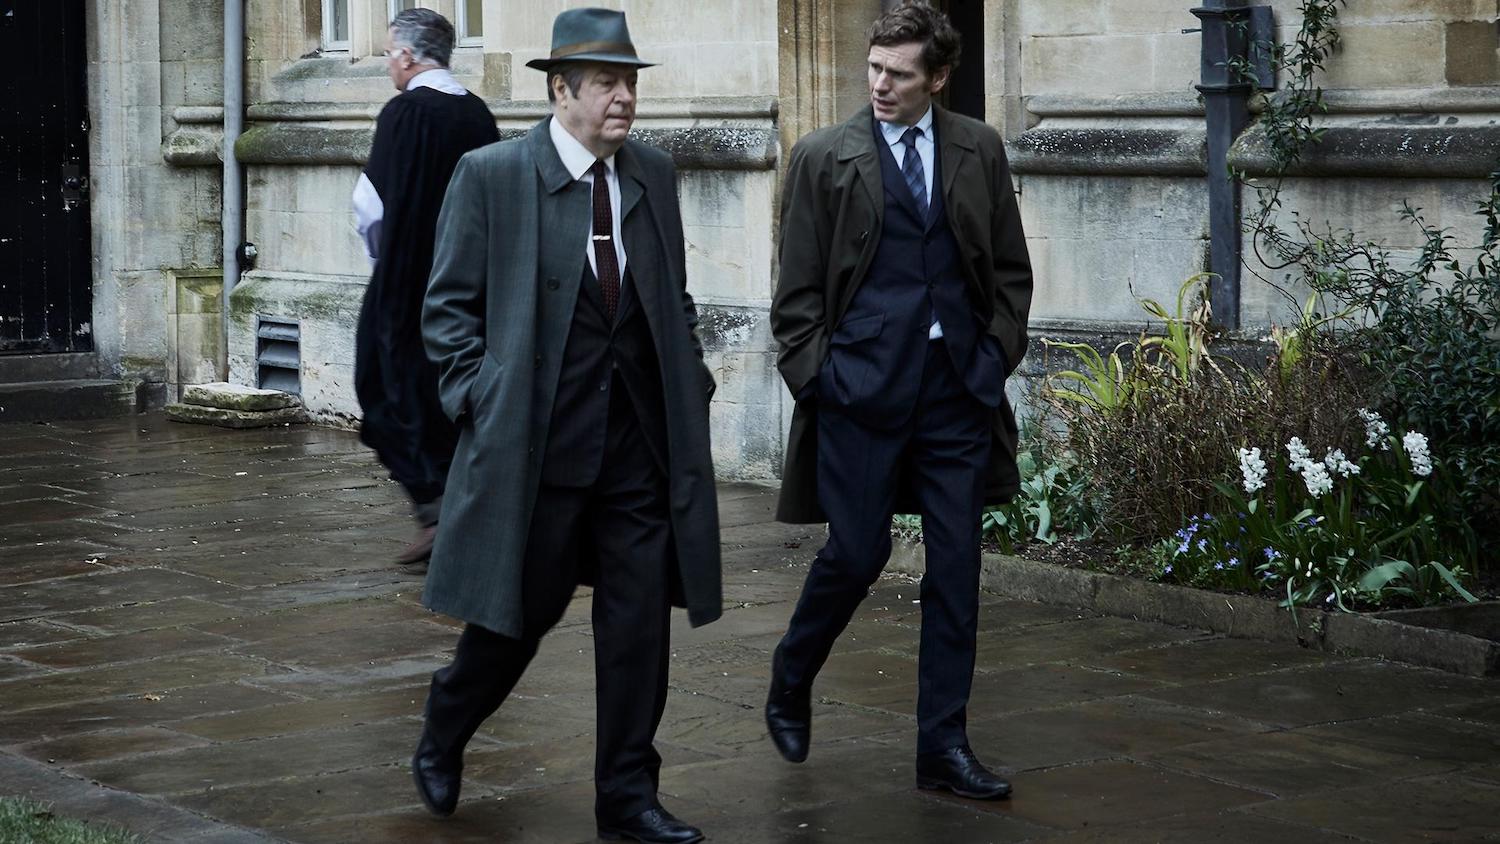 Picture shows: Fred Thursday (Roger Allam) and Morse (Sean Evans). They are walking on wet flagstones beside an old stone building, probably an Oxford college. Ivy and white hyacinths grow in a flower bed.